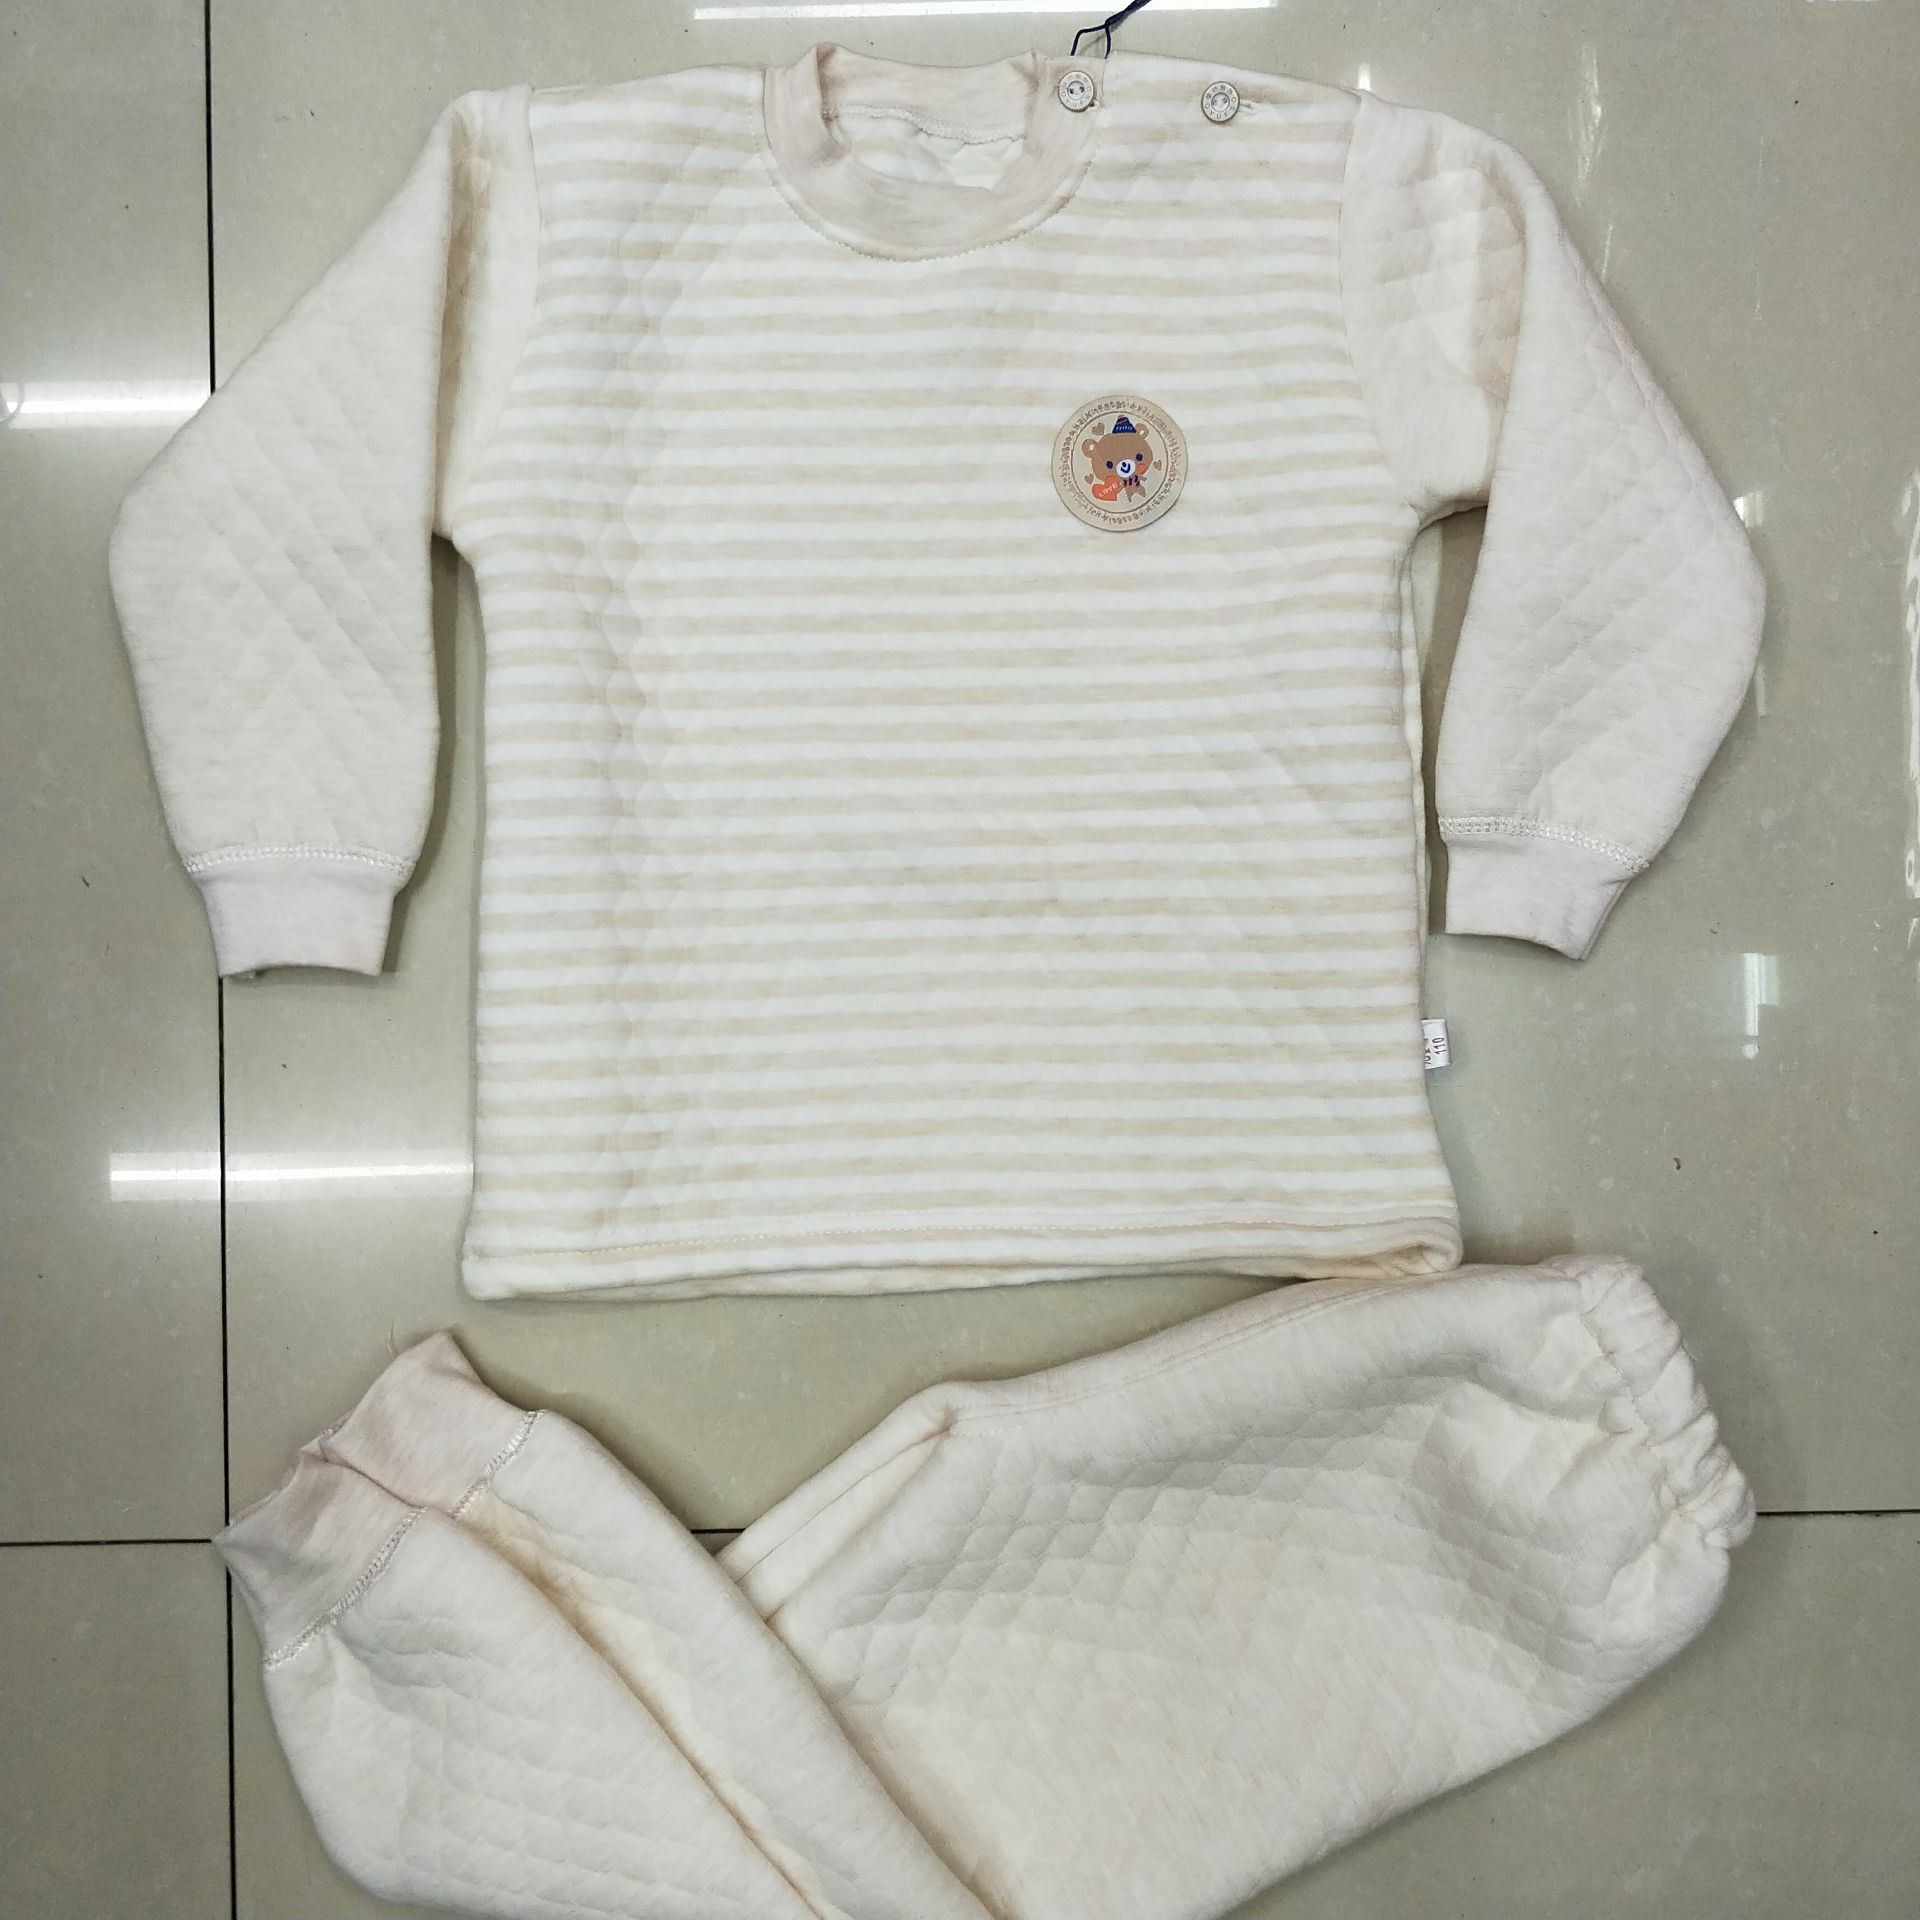 baby thermal suit